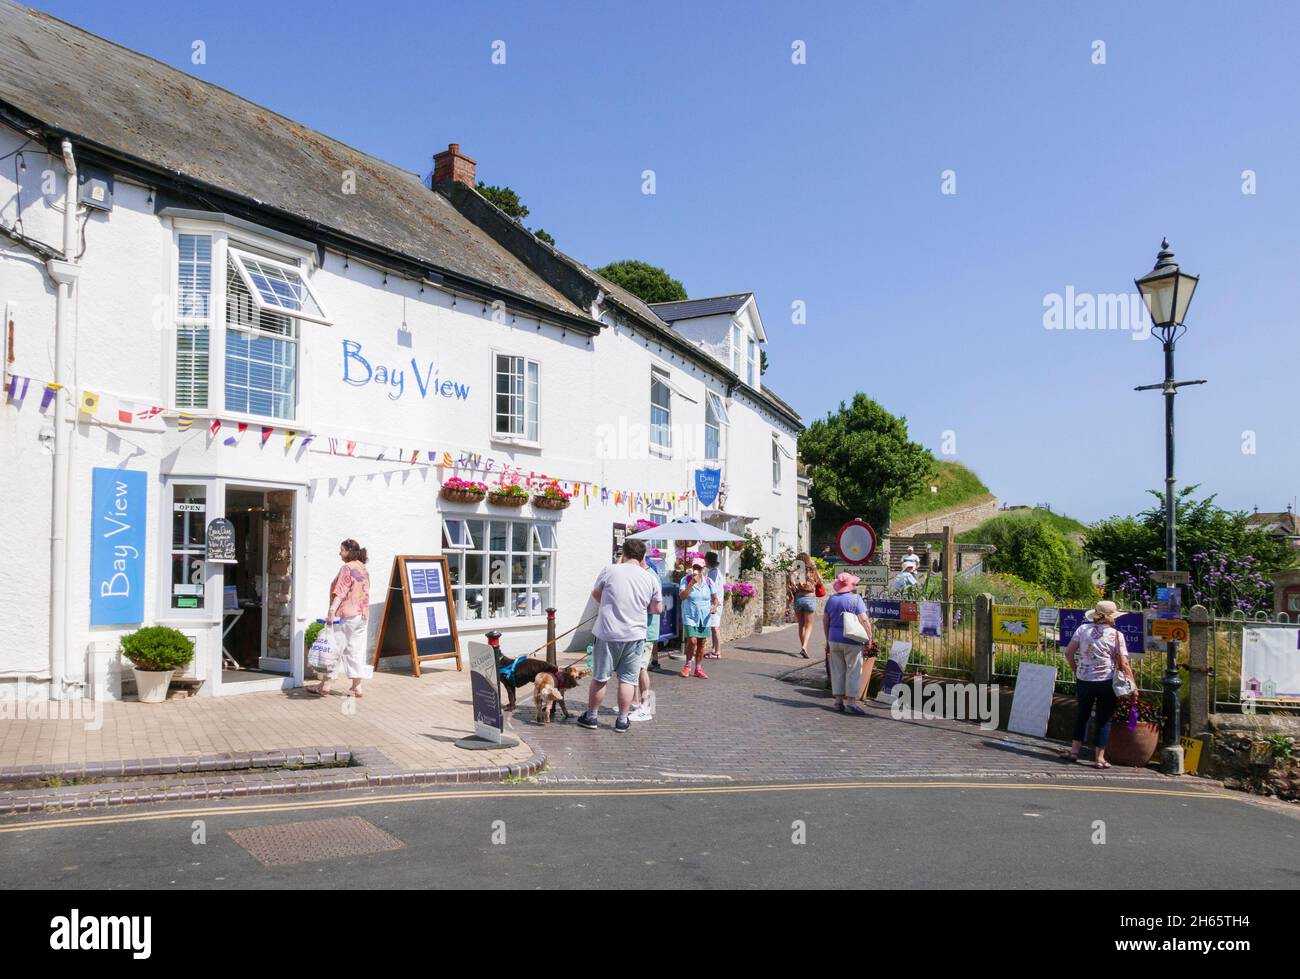 Bay View guest house and bed and breakfast with gift shop in the picturesque fishing village Fore street Seafront Beer Devon England UK GB Europe Stock Photo